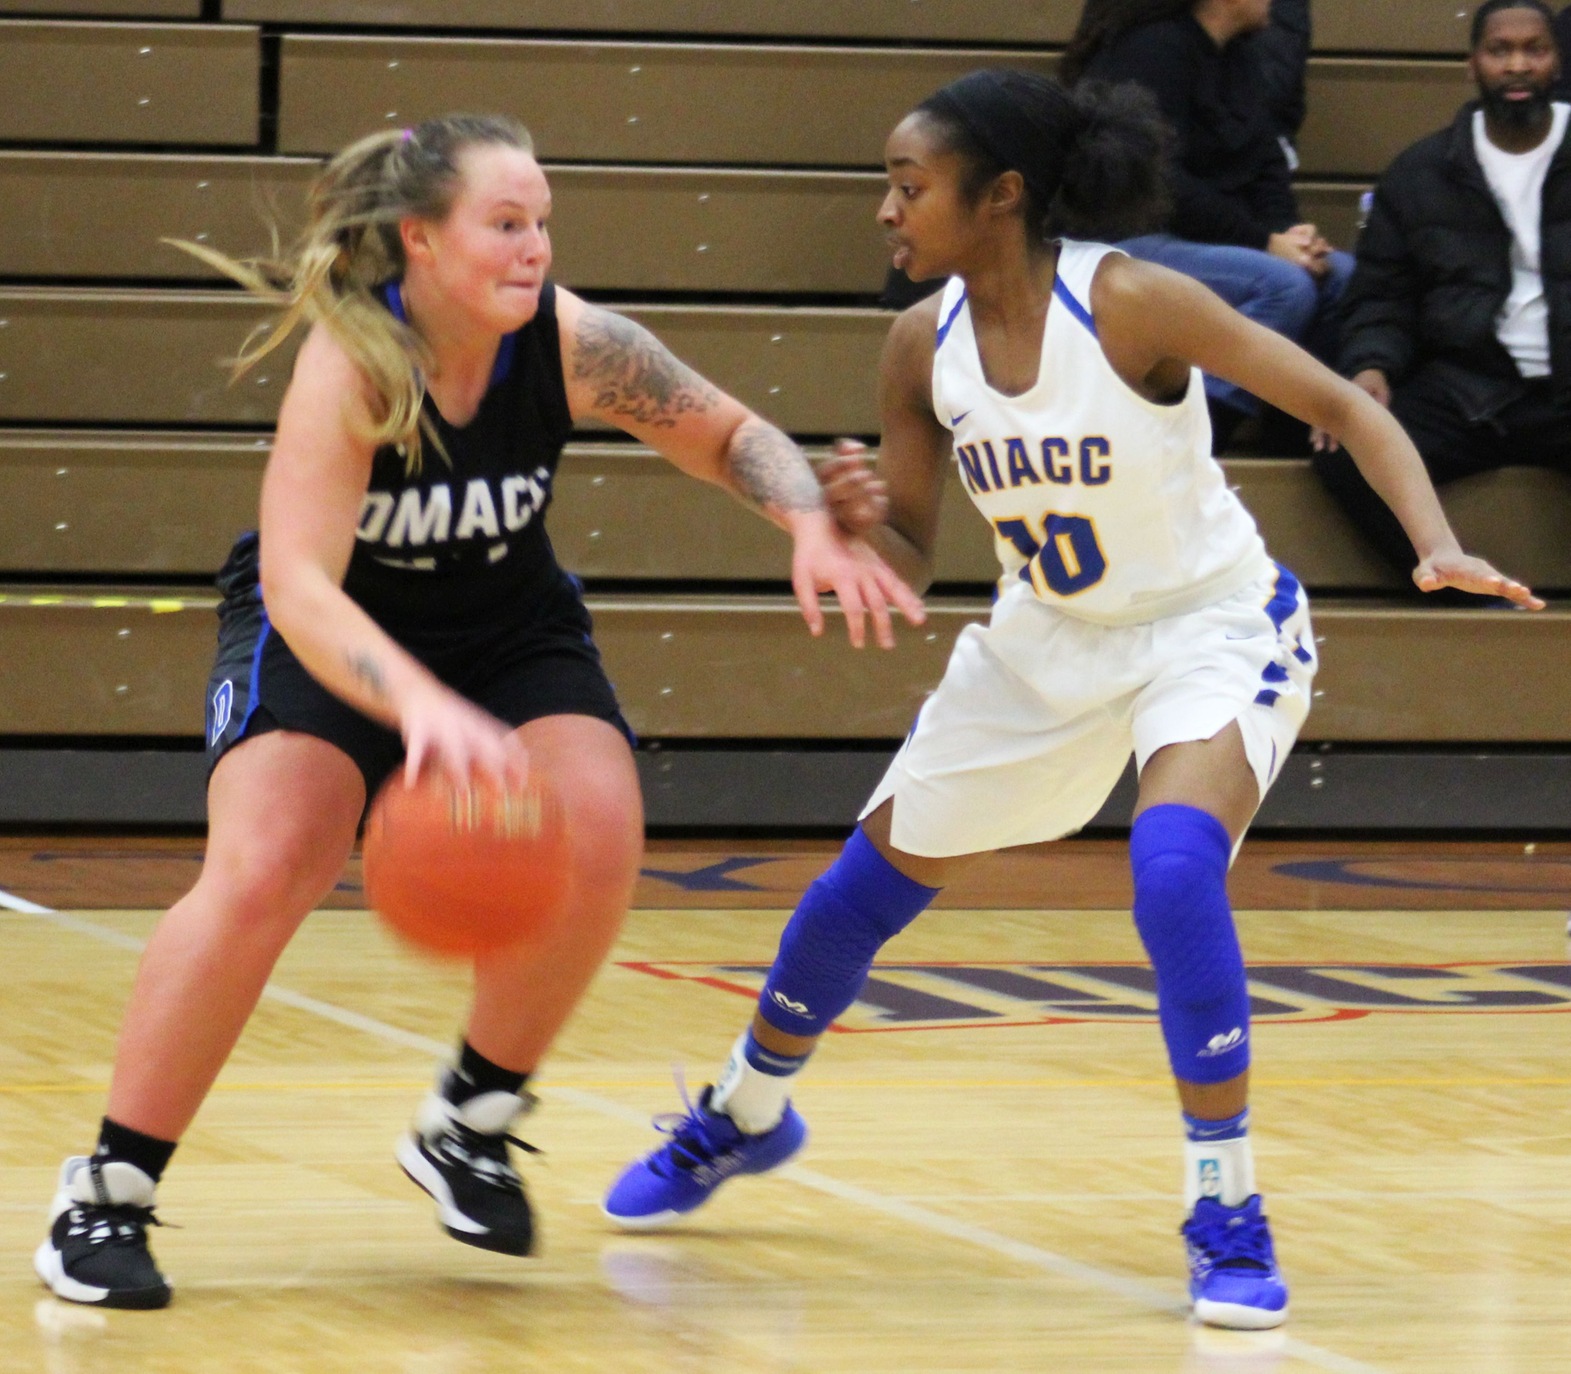 NIACC's Miyah Walker defends during Saturday's home game against DMACC.